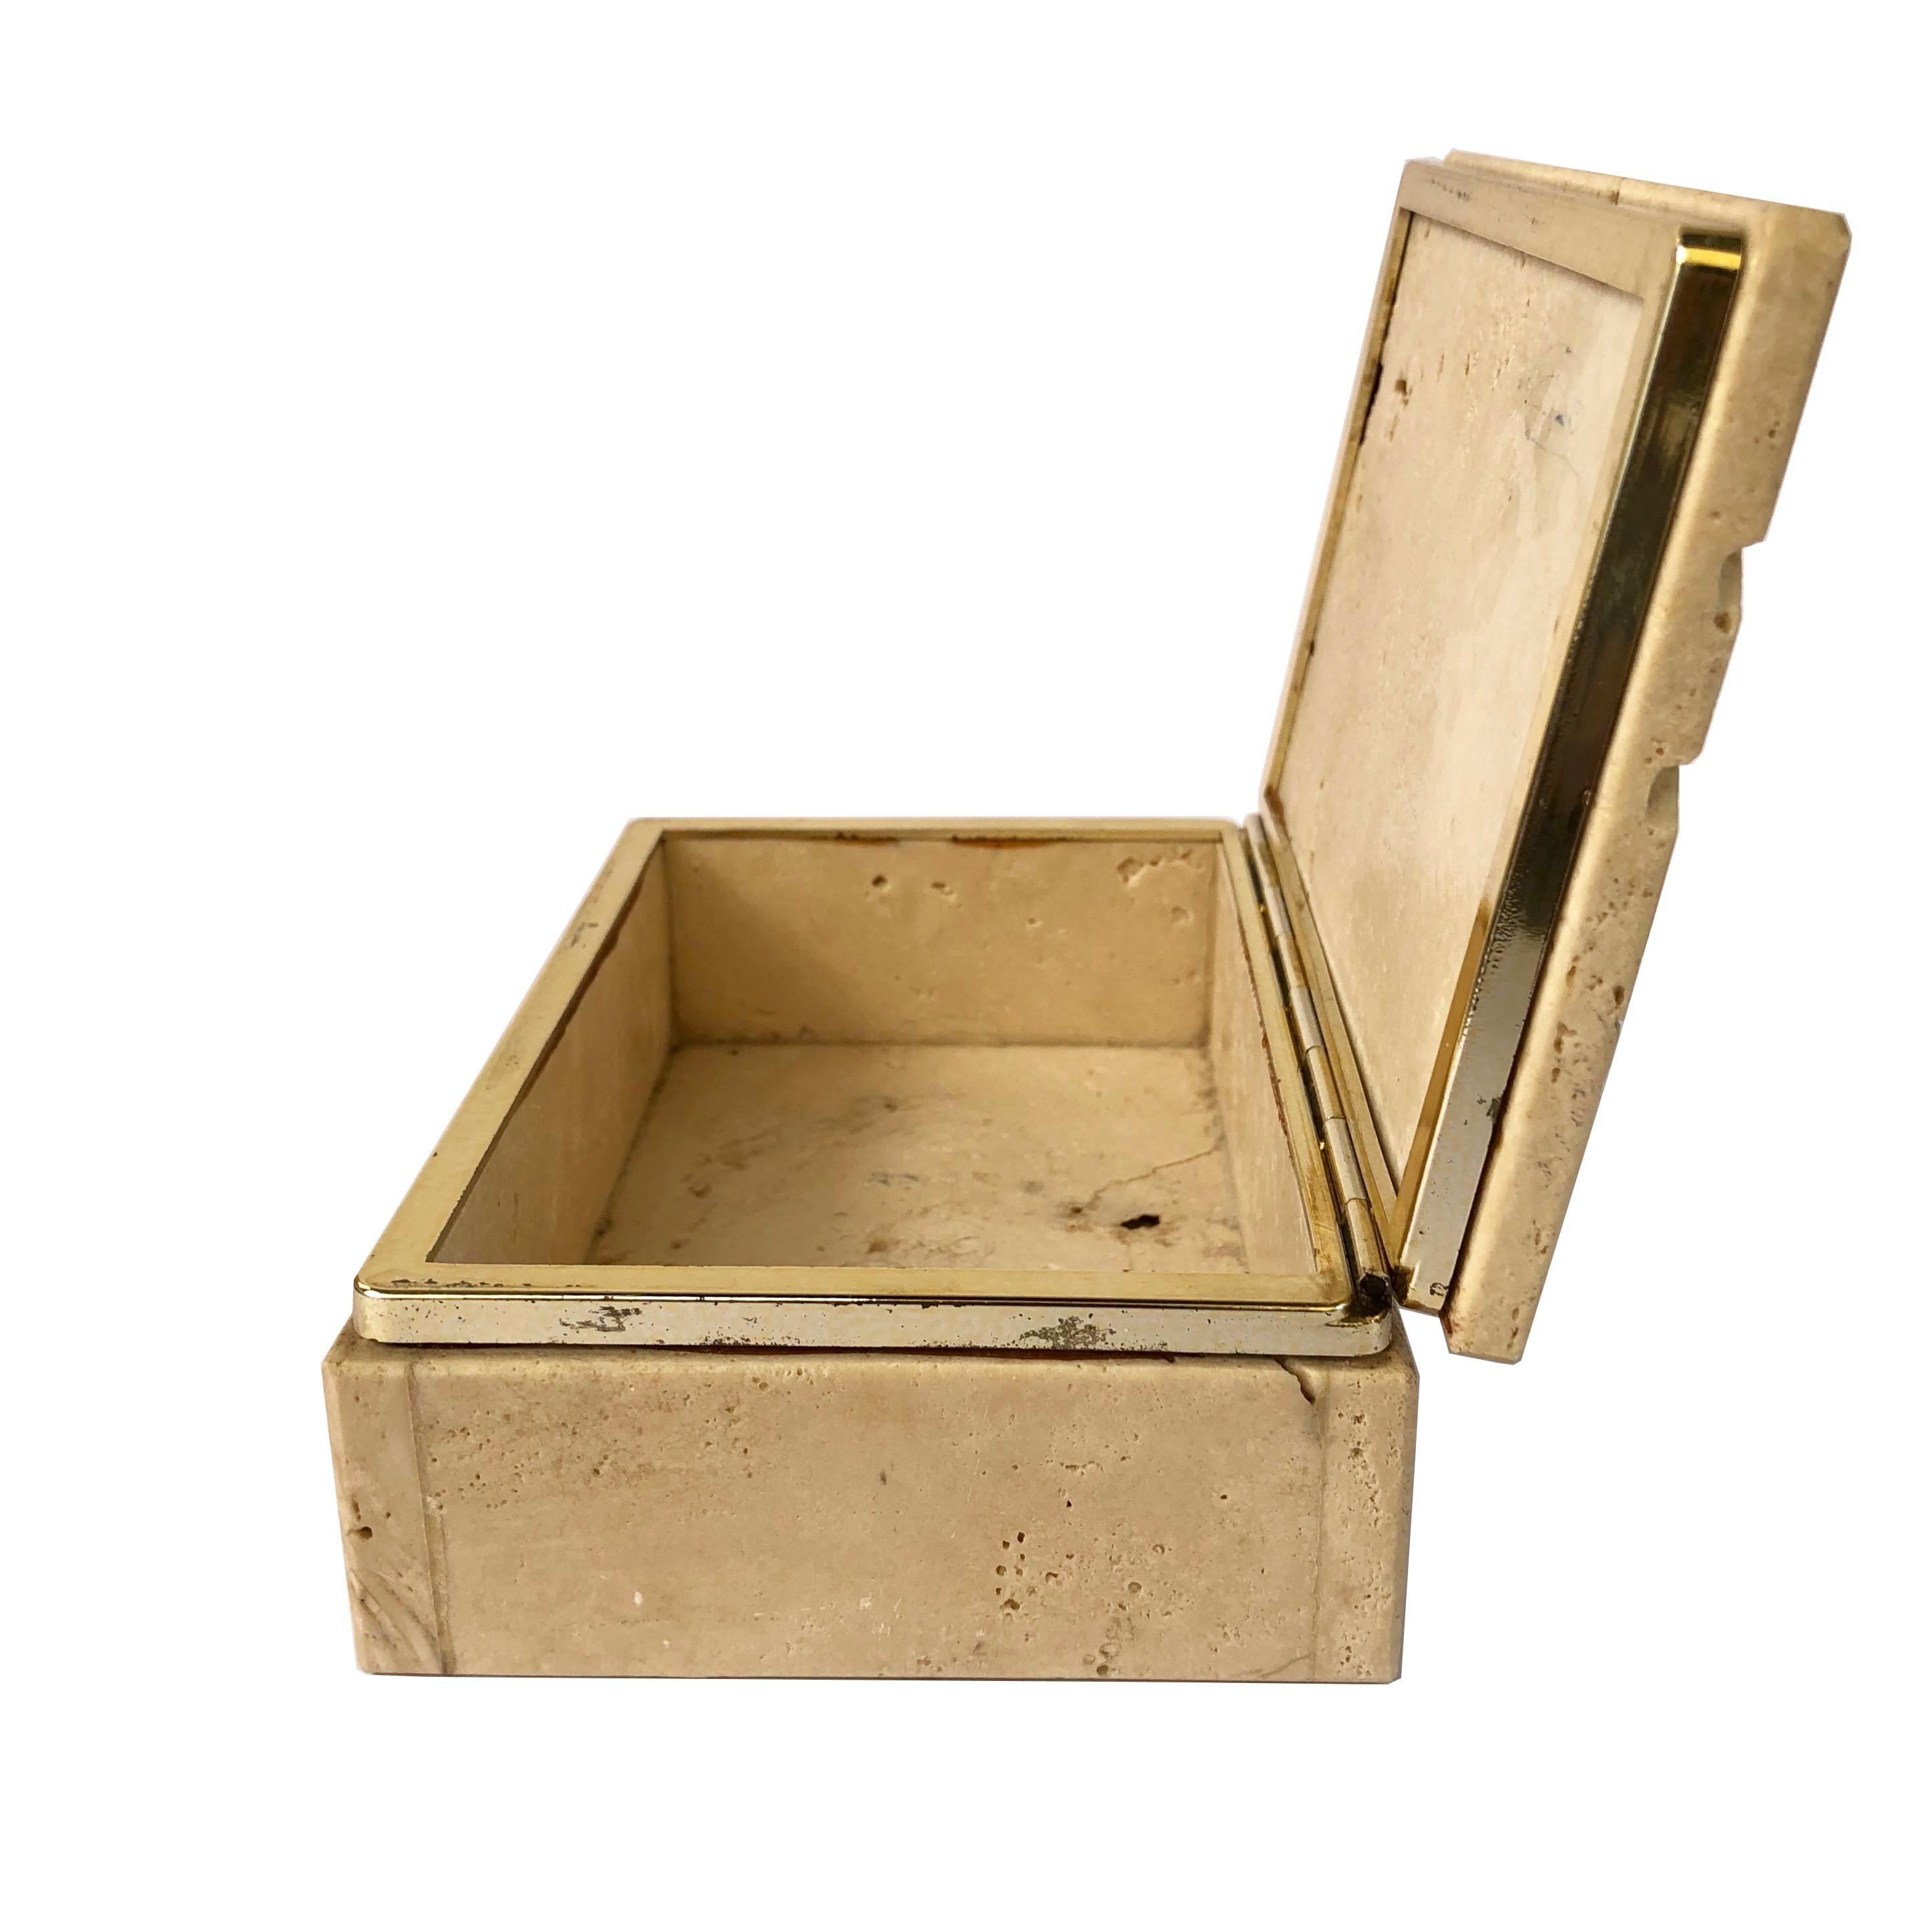 This vintage organic modern Italian hinged box is made of travertine stone and brass. It is from the 1970s and it was made by the Fratelli Mannelli.
The travertine has natural craters in it and on the front it looks like it had been chipped but